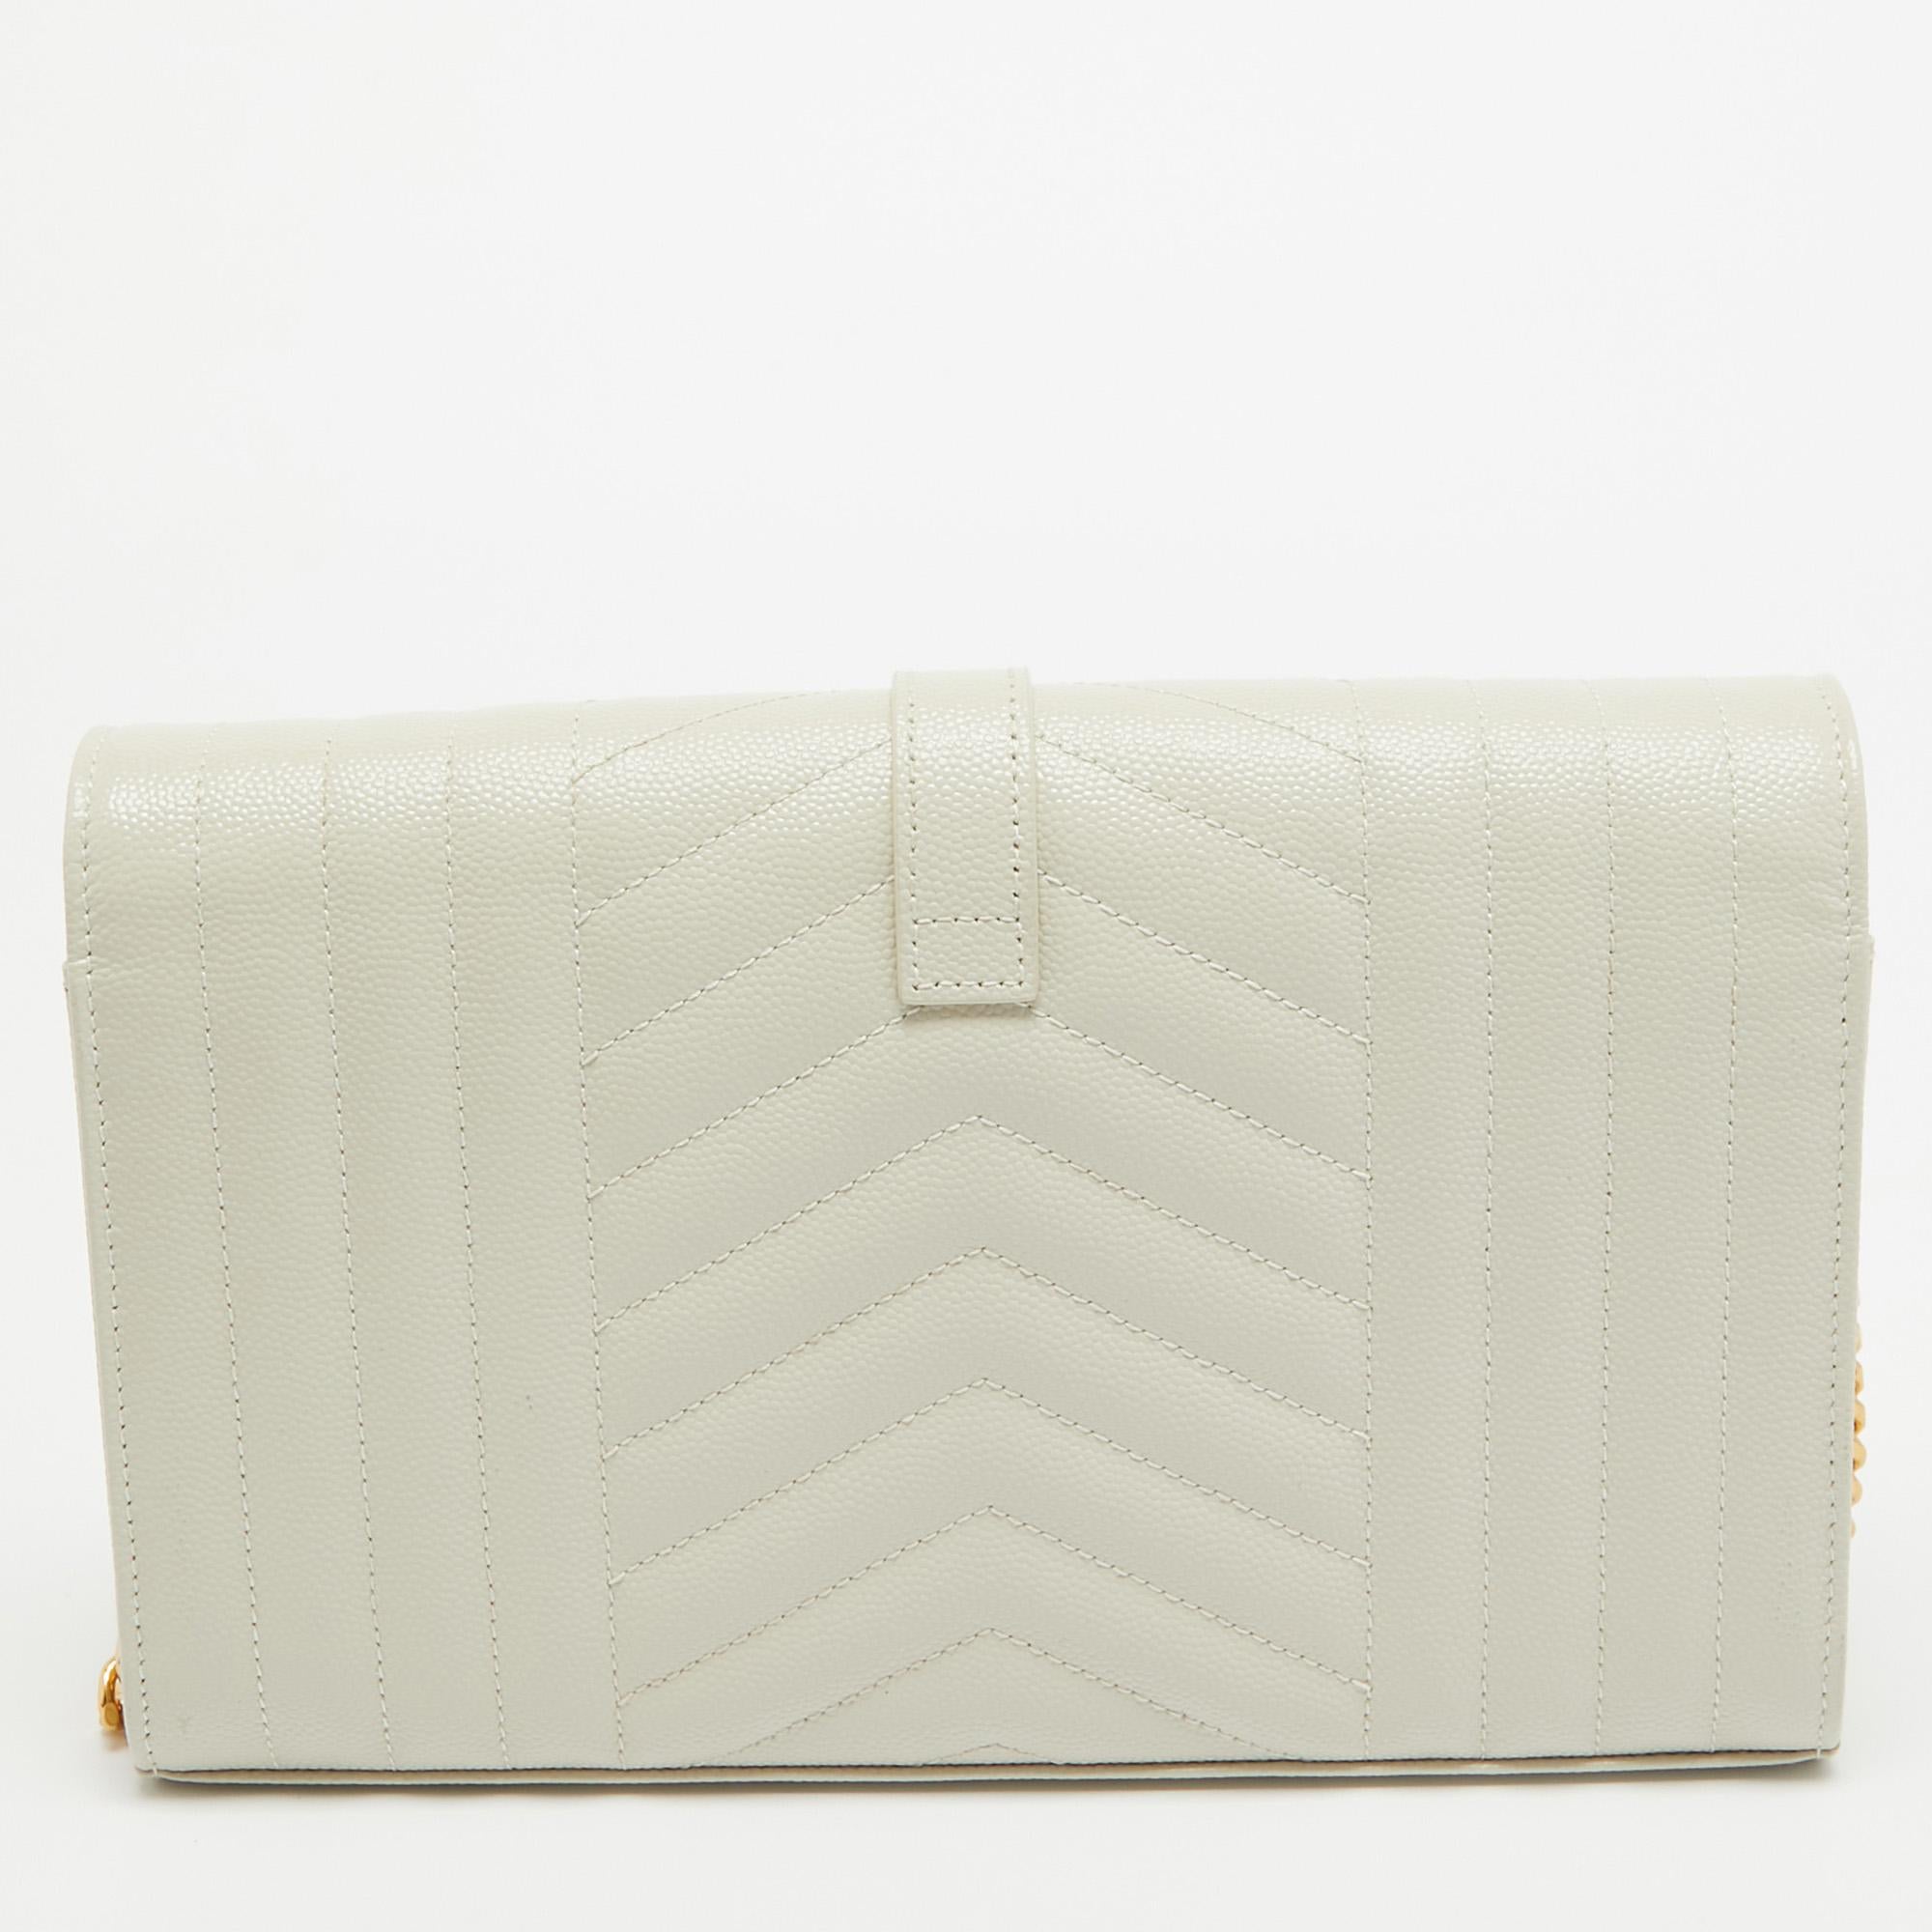 Fashioned using chevron-quilted leather into a structured silhouette, this Saint Laurent Monogram Envelope WOC has high style and a timeless charm. It has a flap design and the front is highlighted with a gold-tone YSL logo. The interior is lined